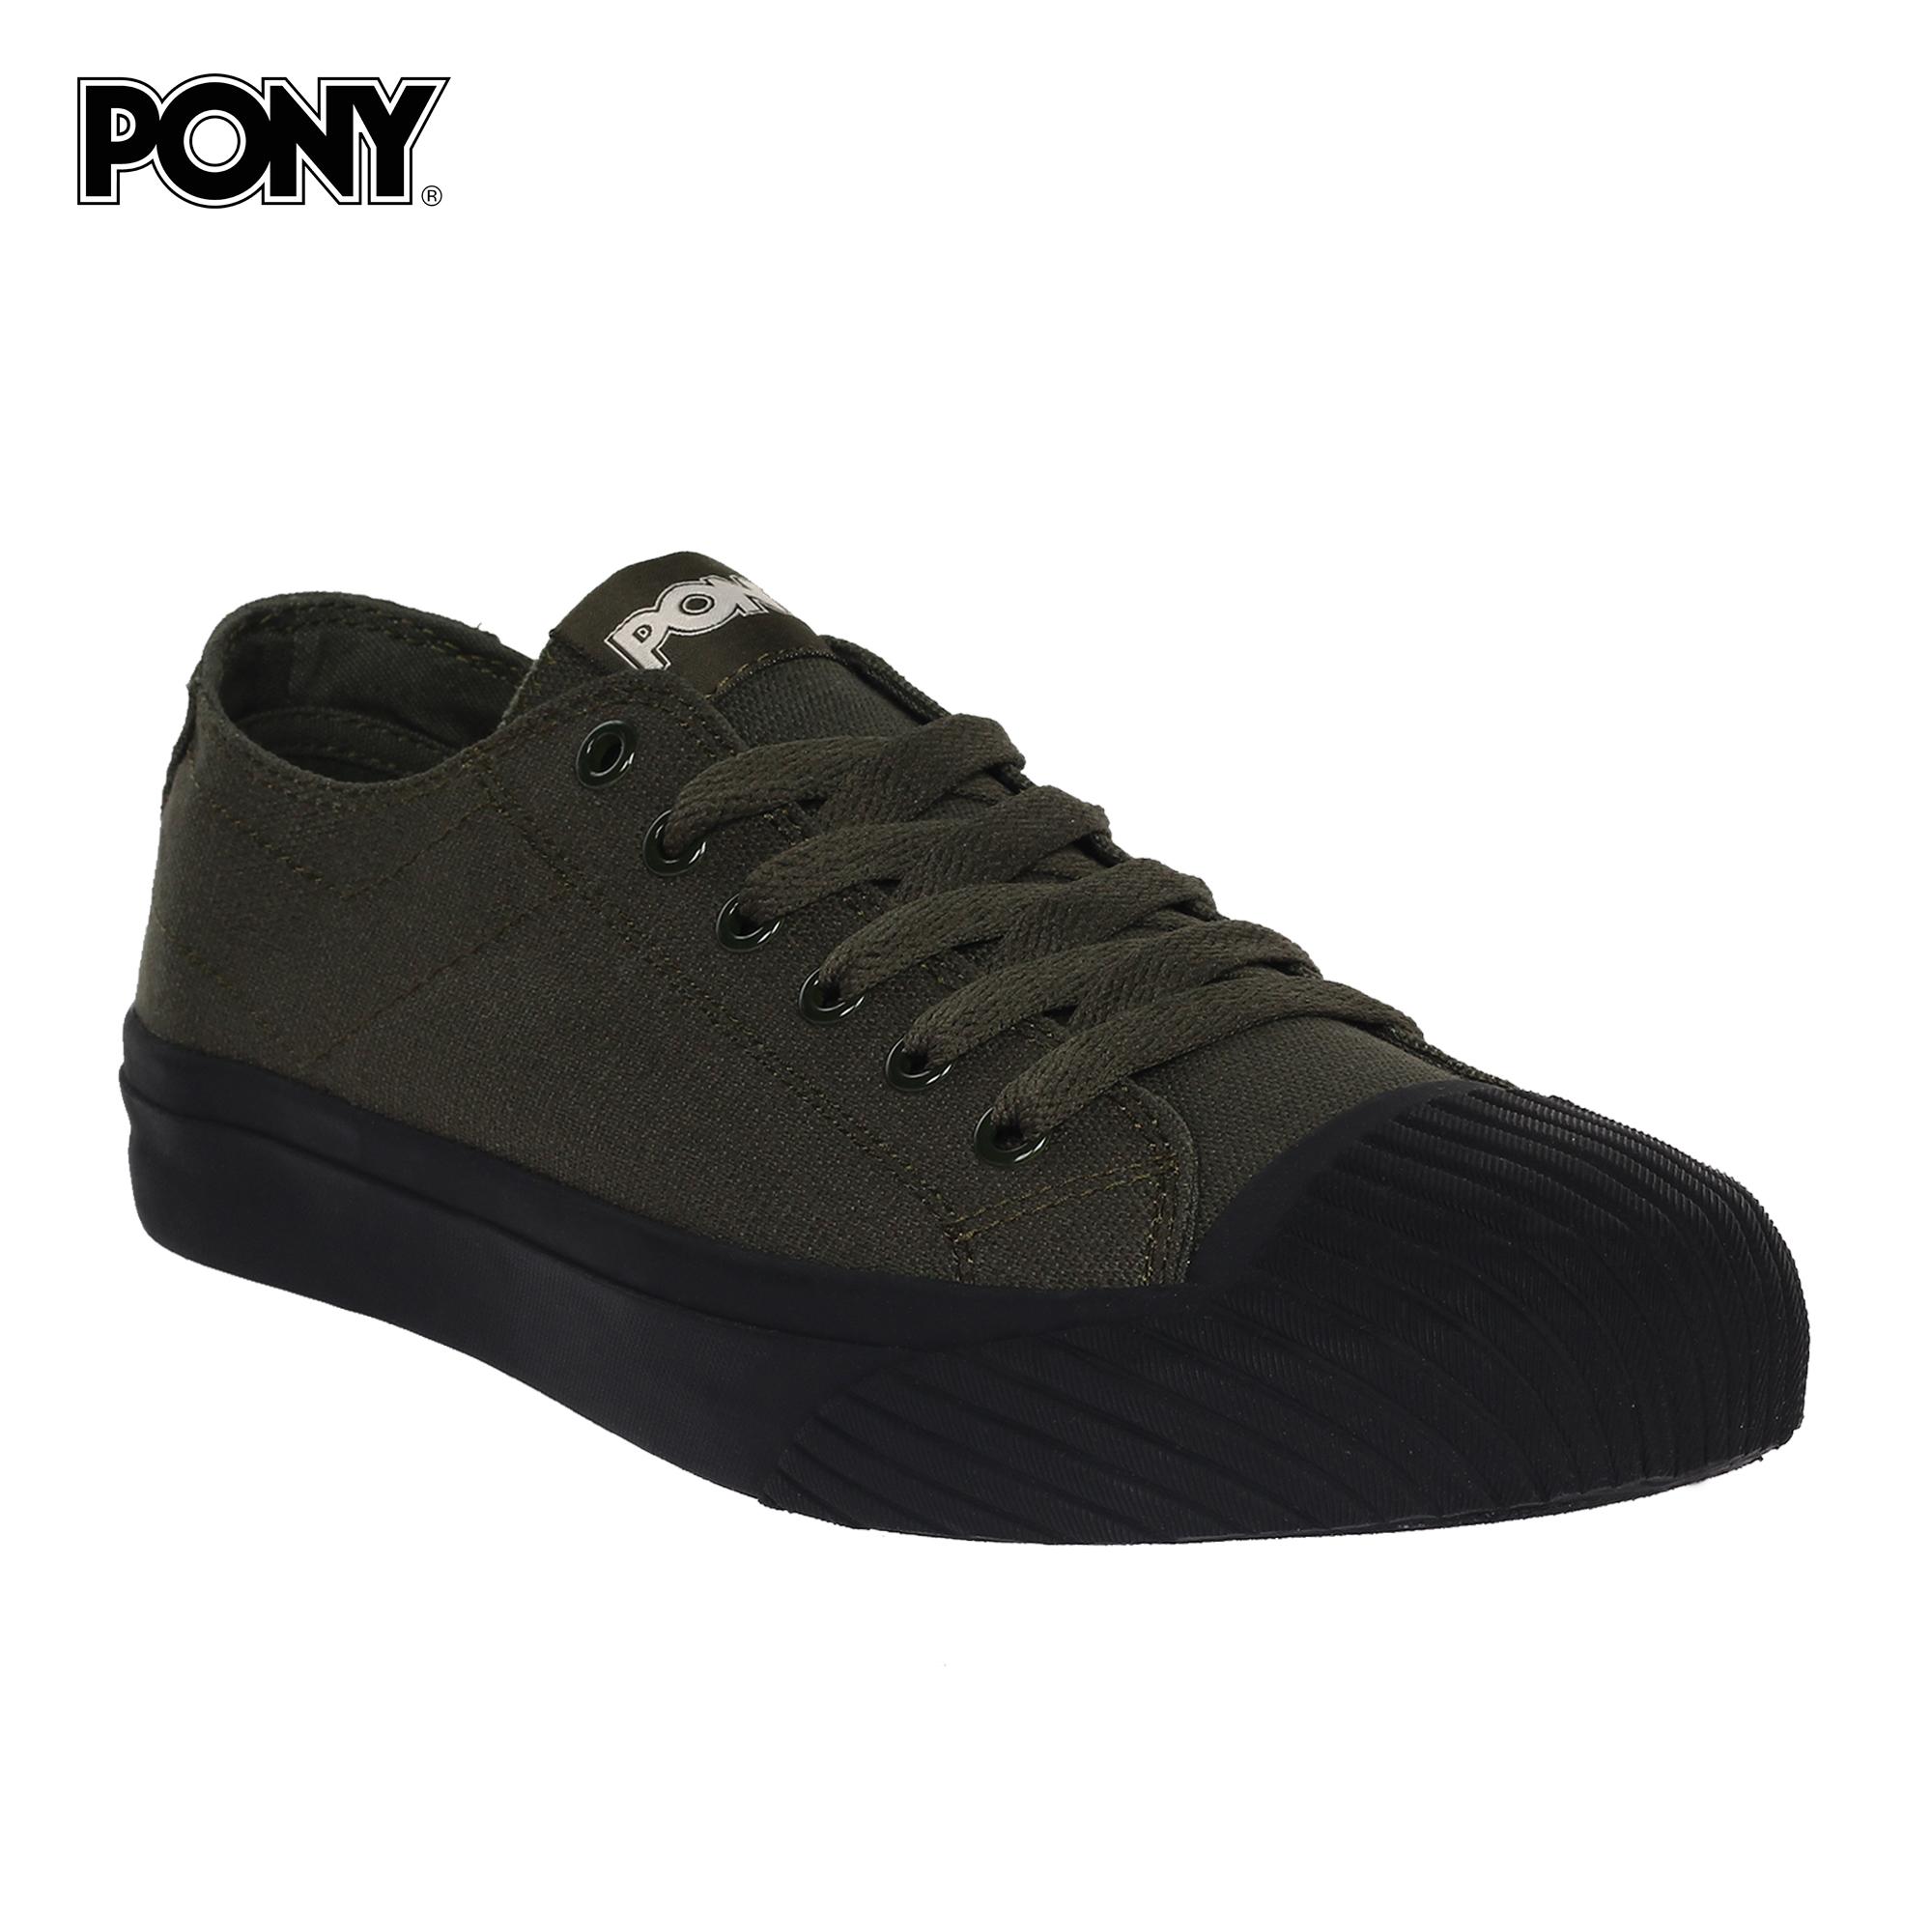 pony sneakers for sale